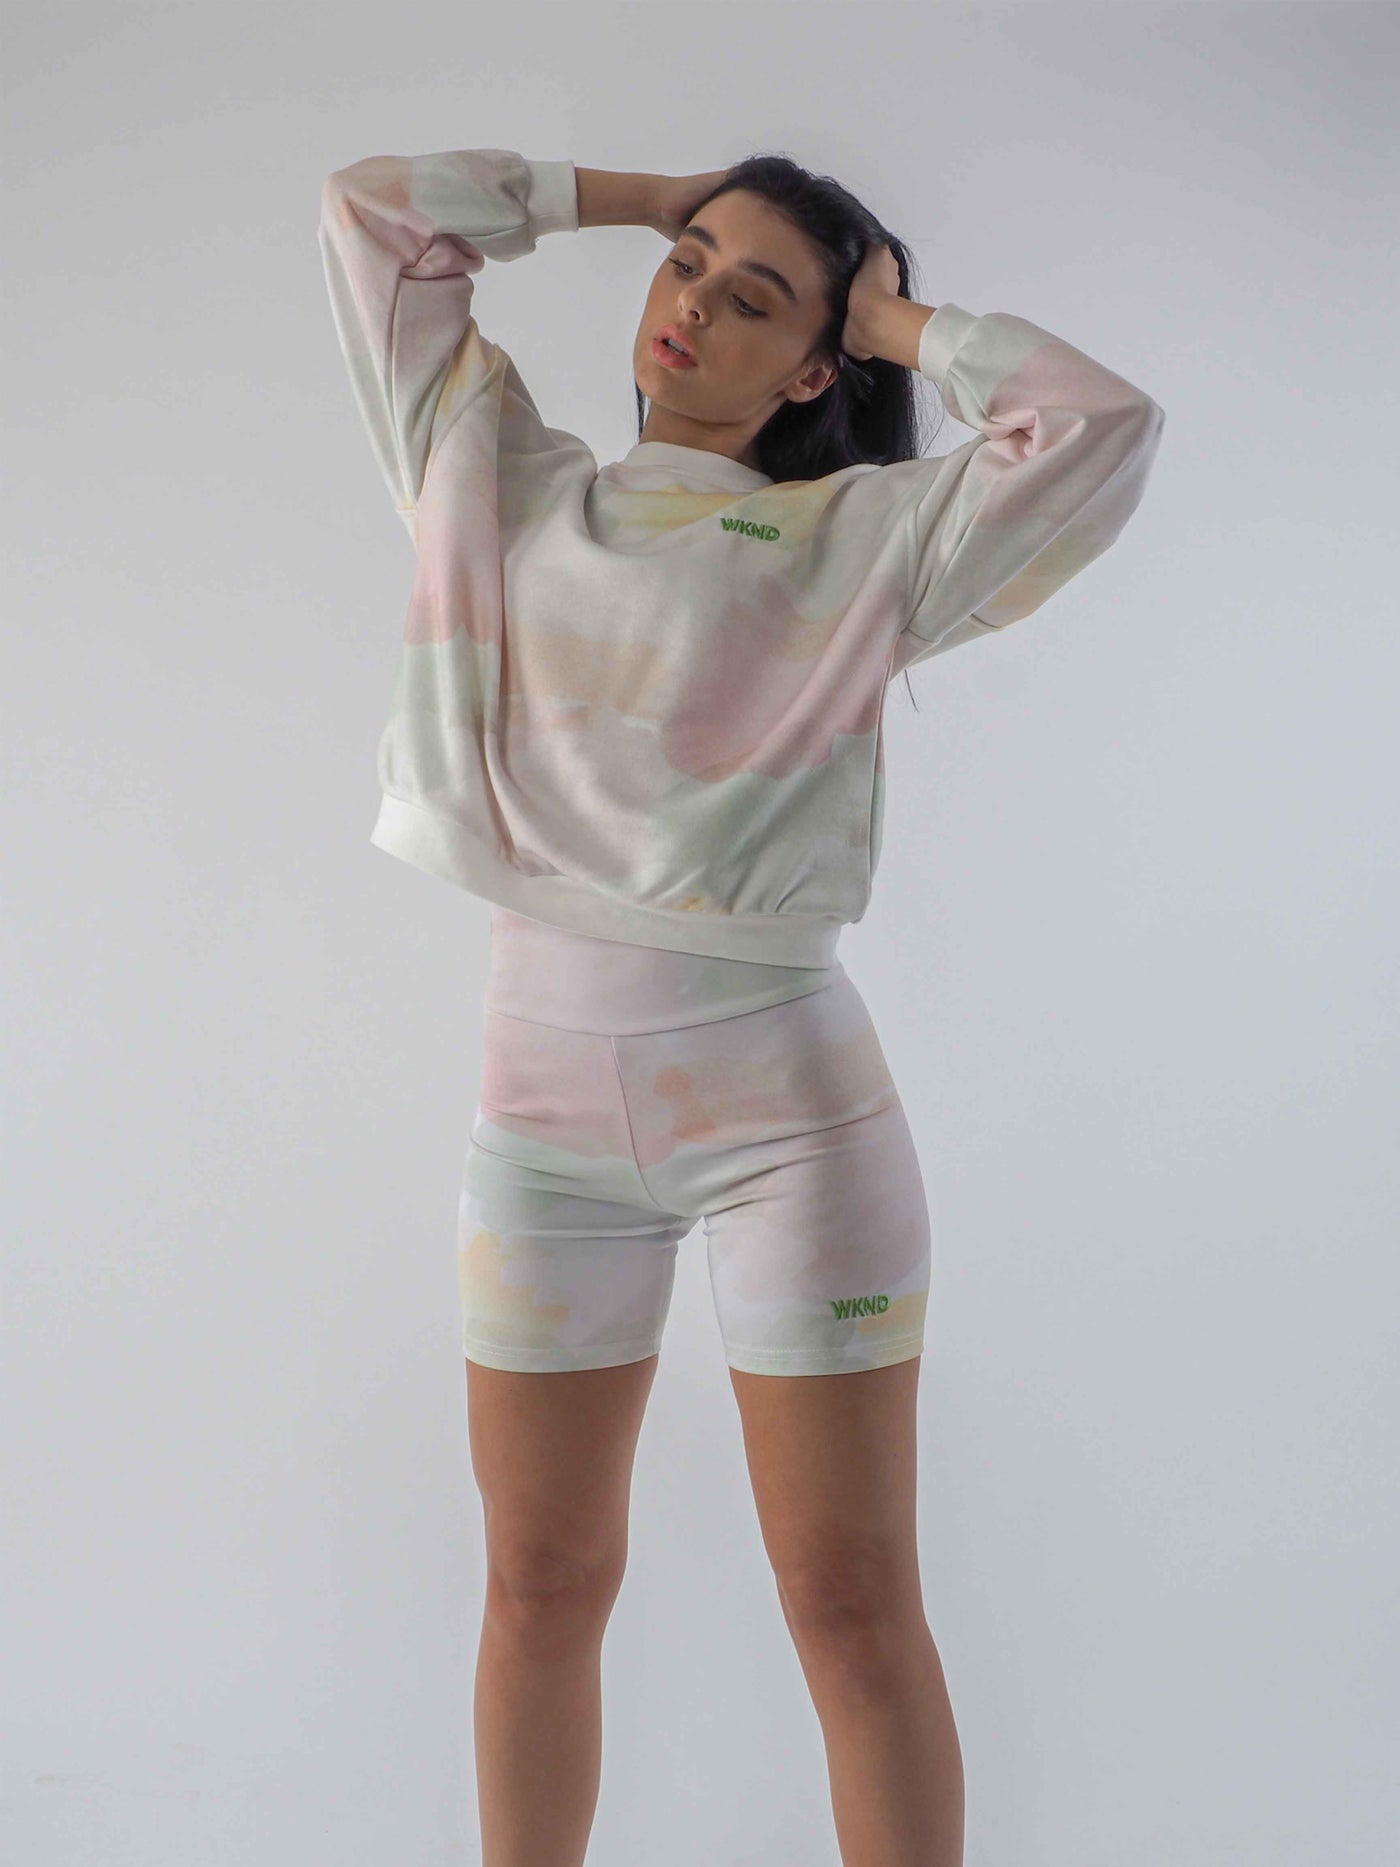 Model has dark hair and is wearing watercolour tie die sweatshirt with matching cycling shorts.